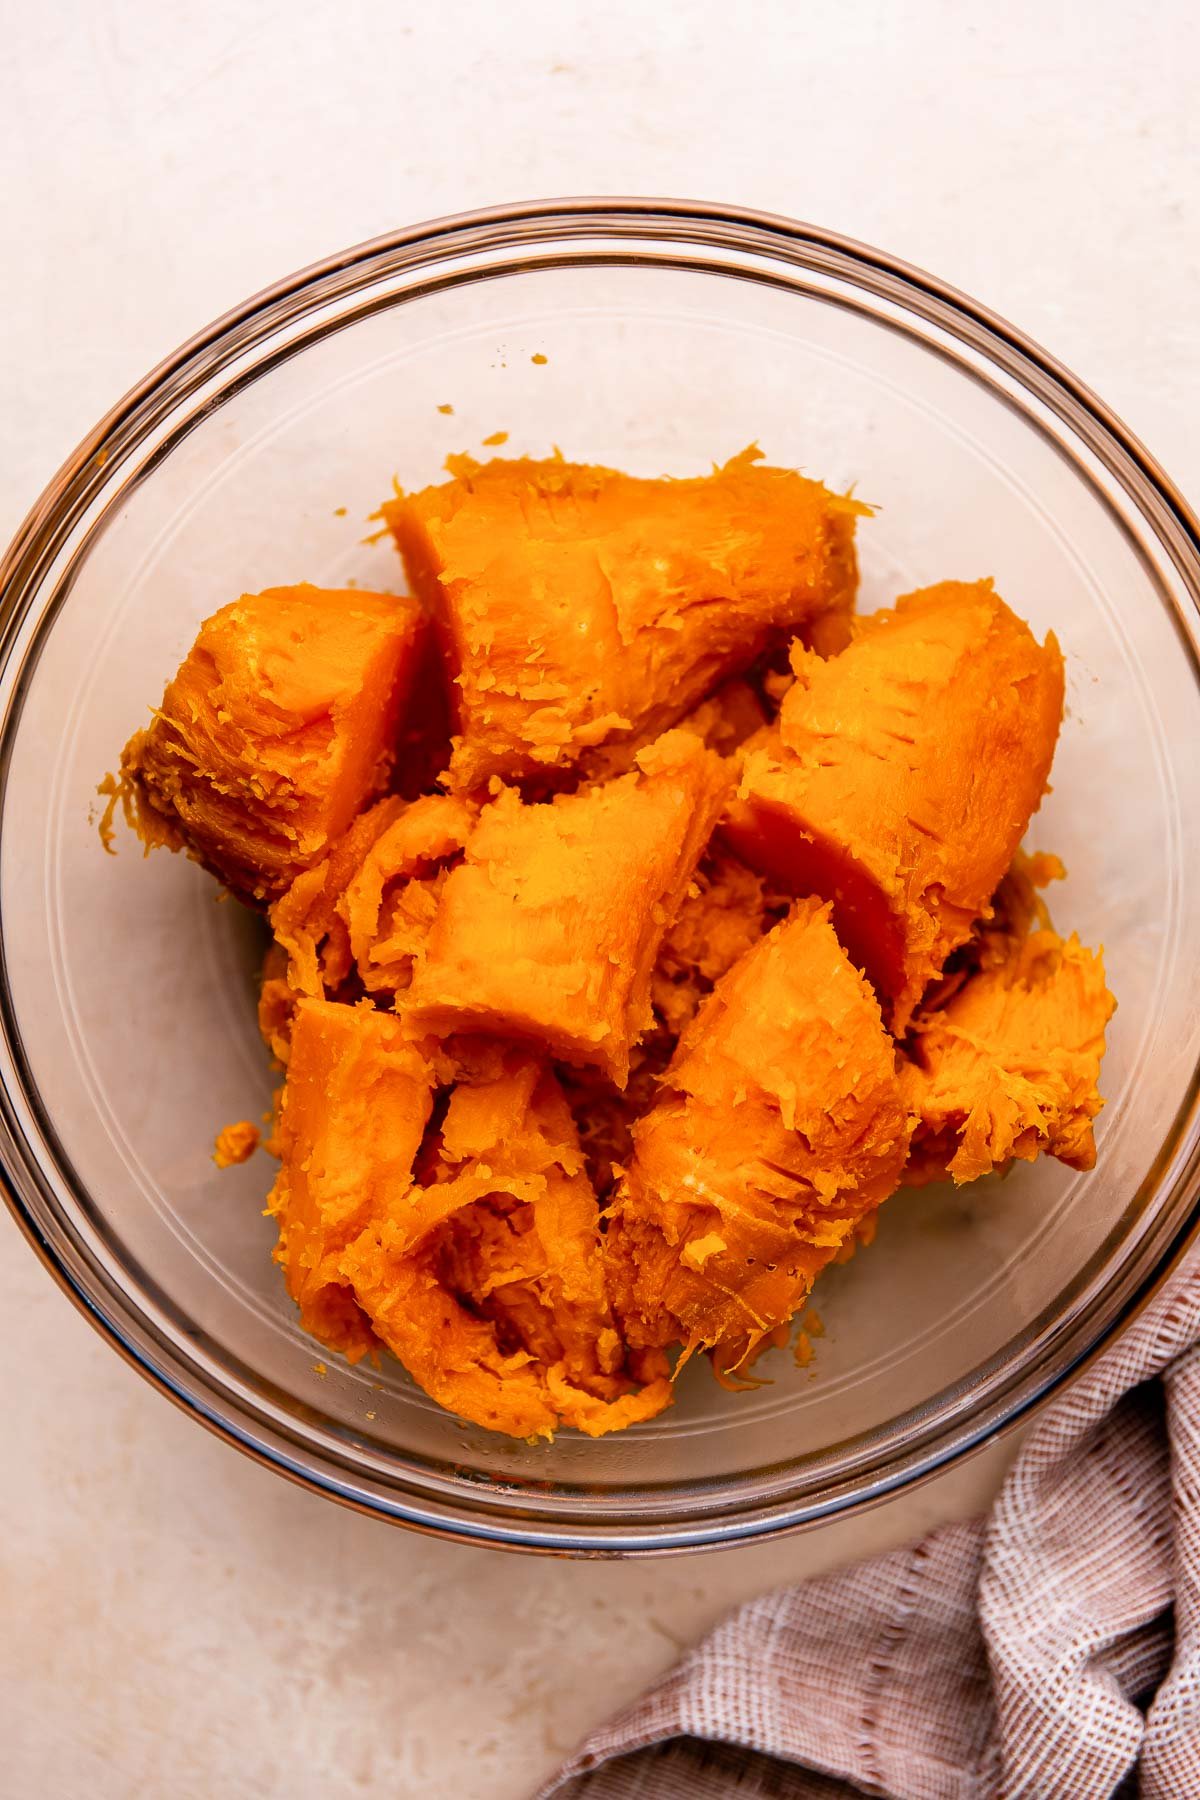 Baked and peeled sweet potatoes fill a large glass mixing bowl that sits atop a light peach colored textured surface. A muted red linen napkin rests alongside the bowl.